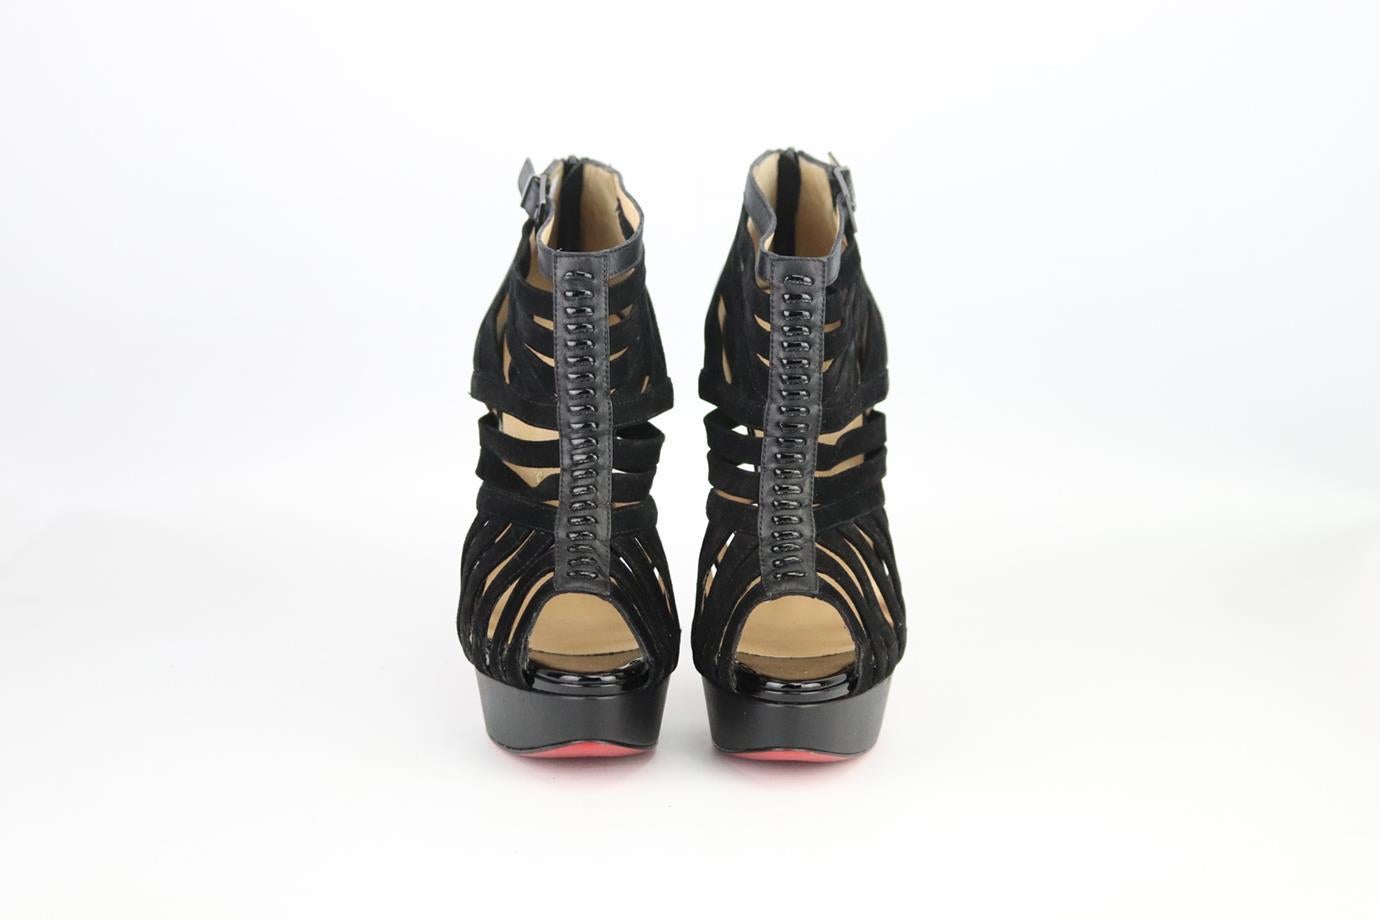 Christian Louboutin cutout suede and leather platform sandals. Made from black patent leather and suede with cutout detail and set on the brand’s iconic red sole. Black. Zip fastening at back. Does not come with box or dustbag. Size: EU 38 (UK 5, US